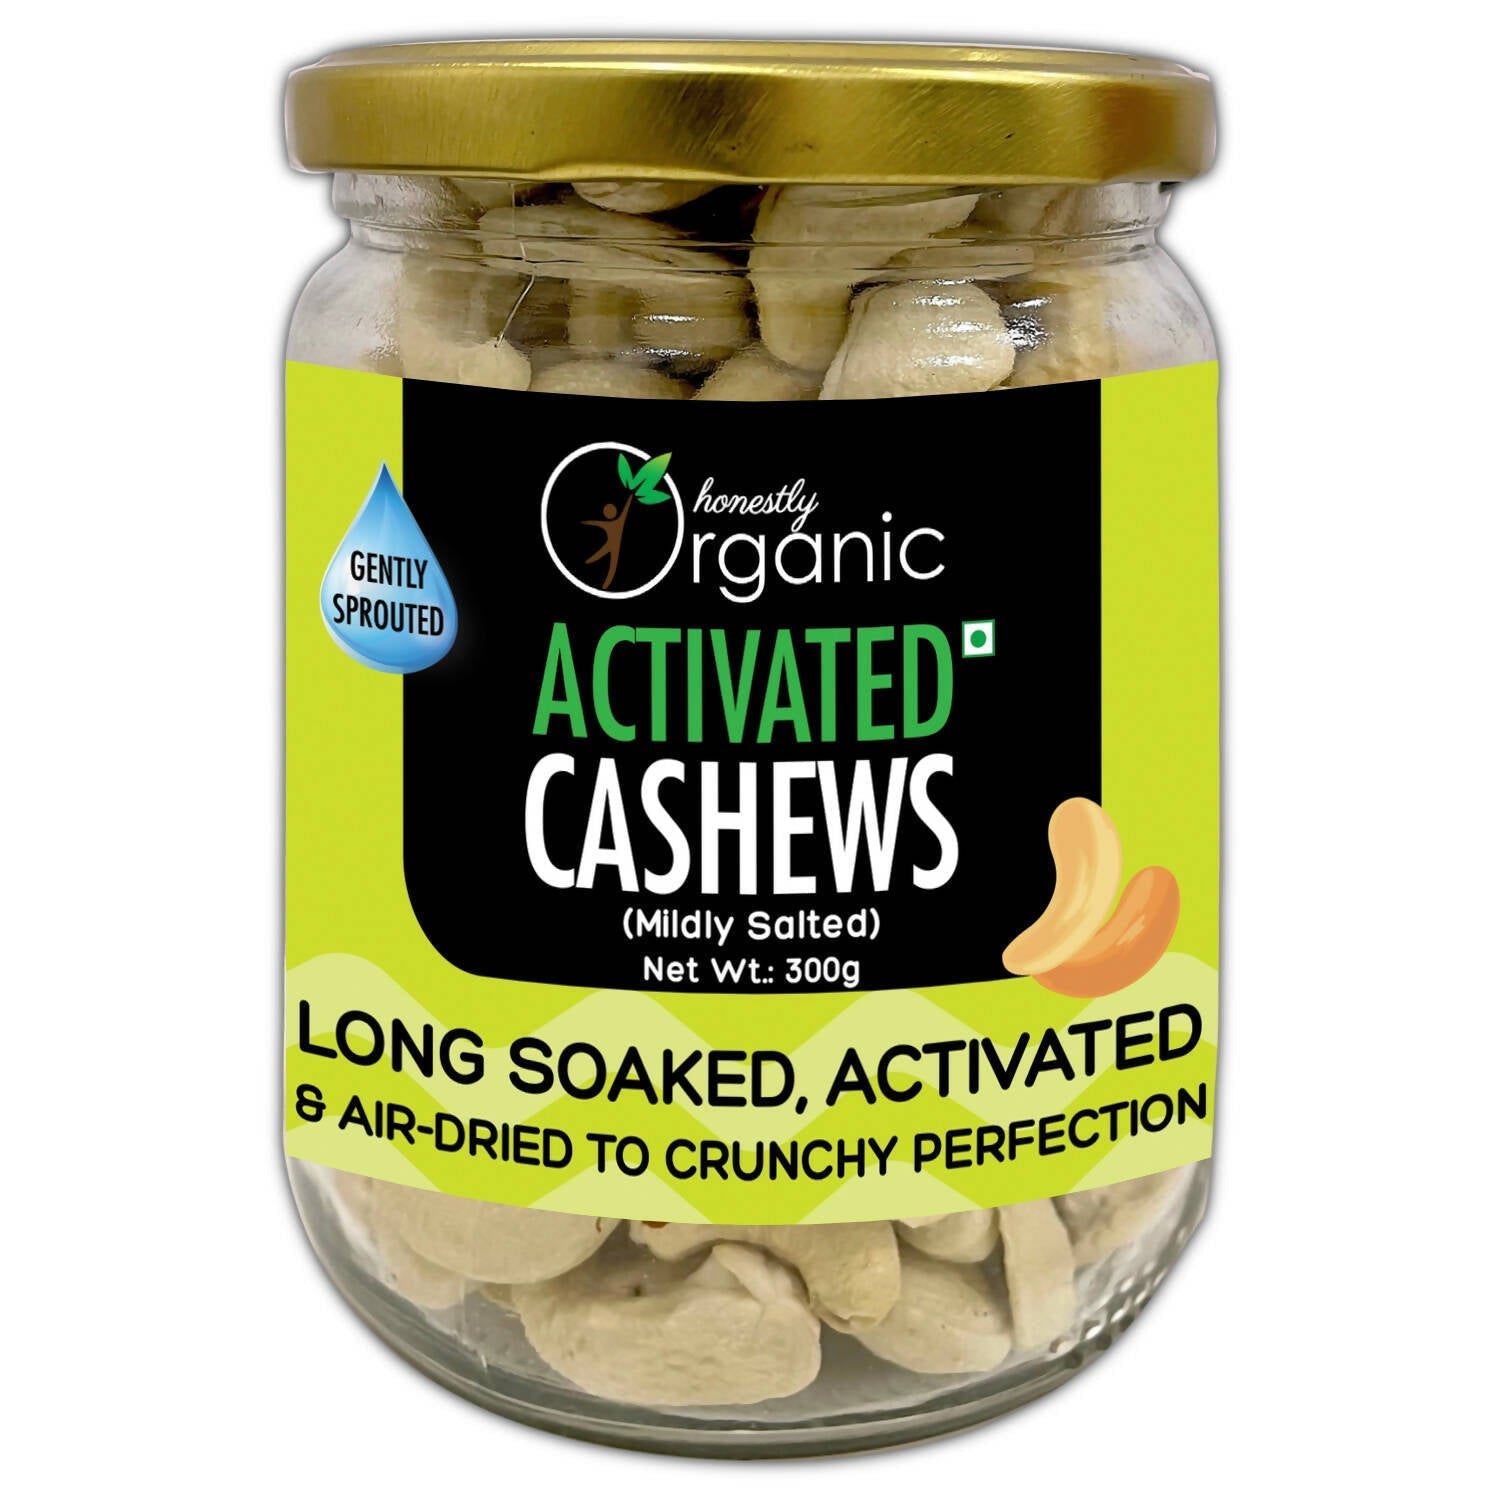 D-Alive Honestly Organic Activated Cashews - buy in USA, Australia, Canada